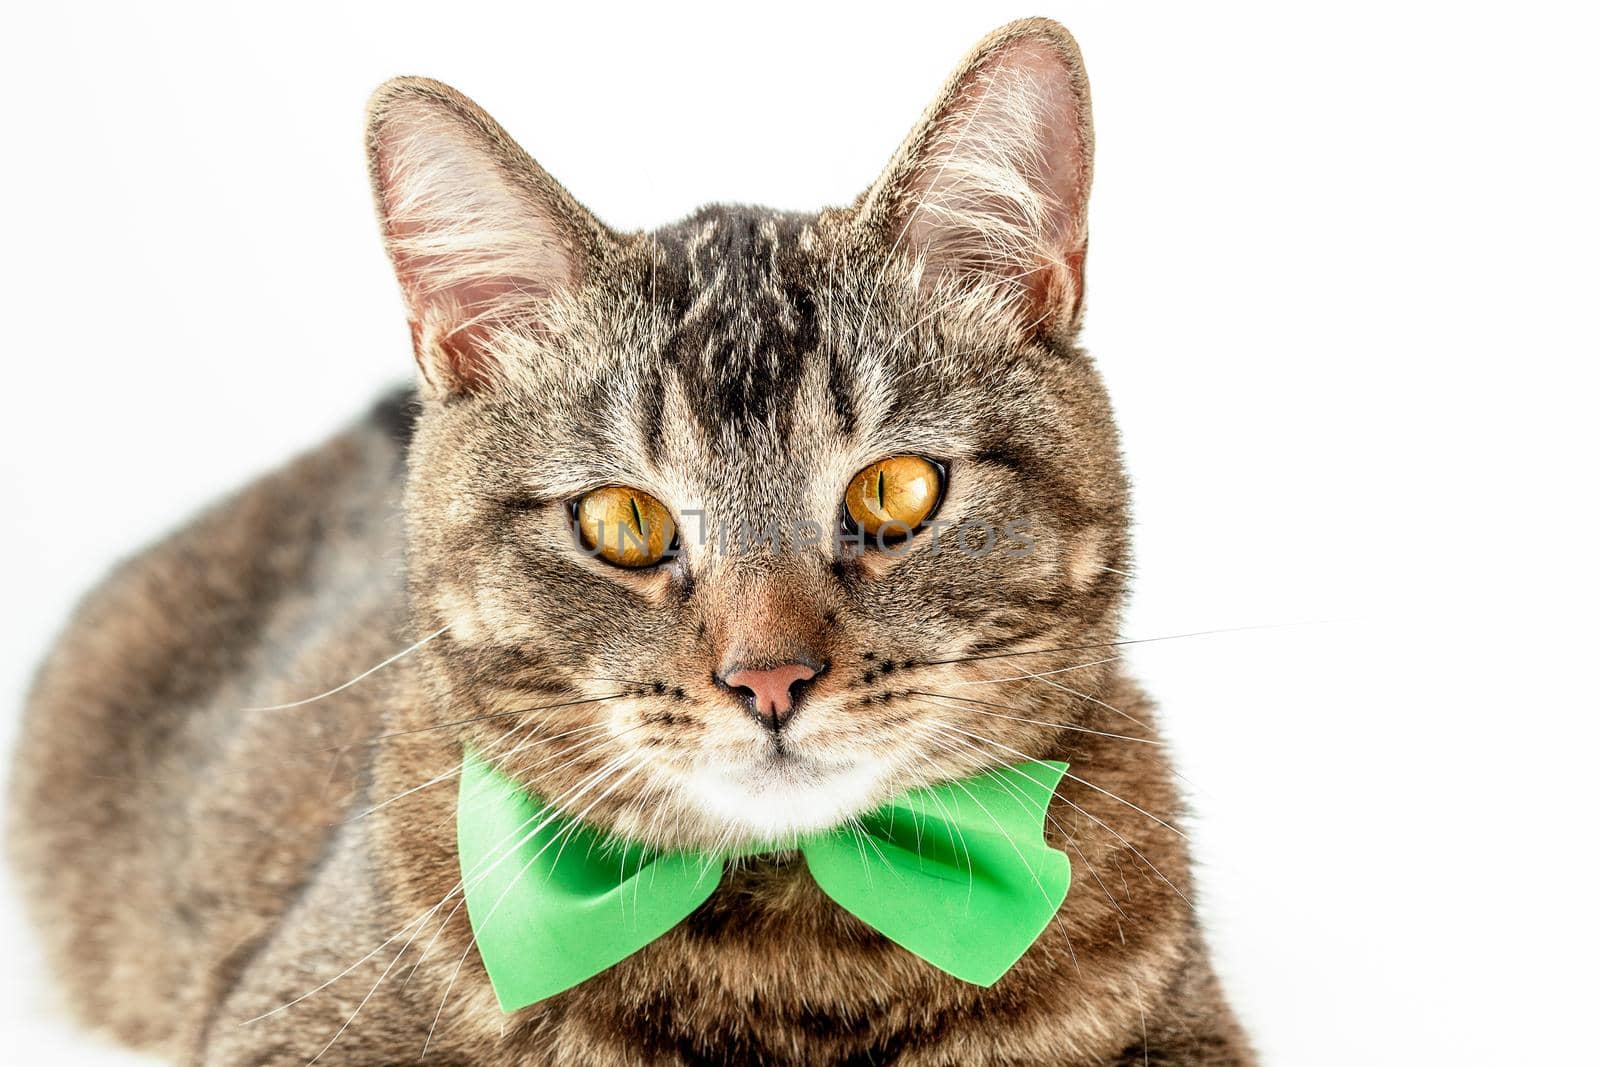 Portrait of isolated tricolor cat with yellow eyes and green butterfly tie on neck looking at camera on white background